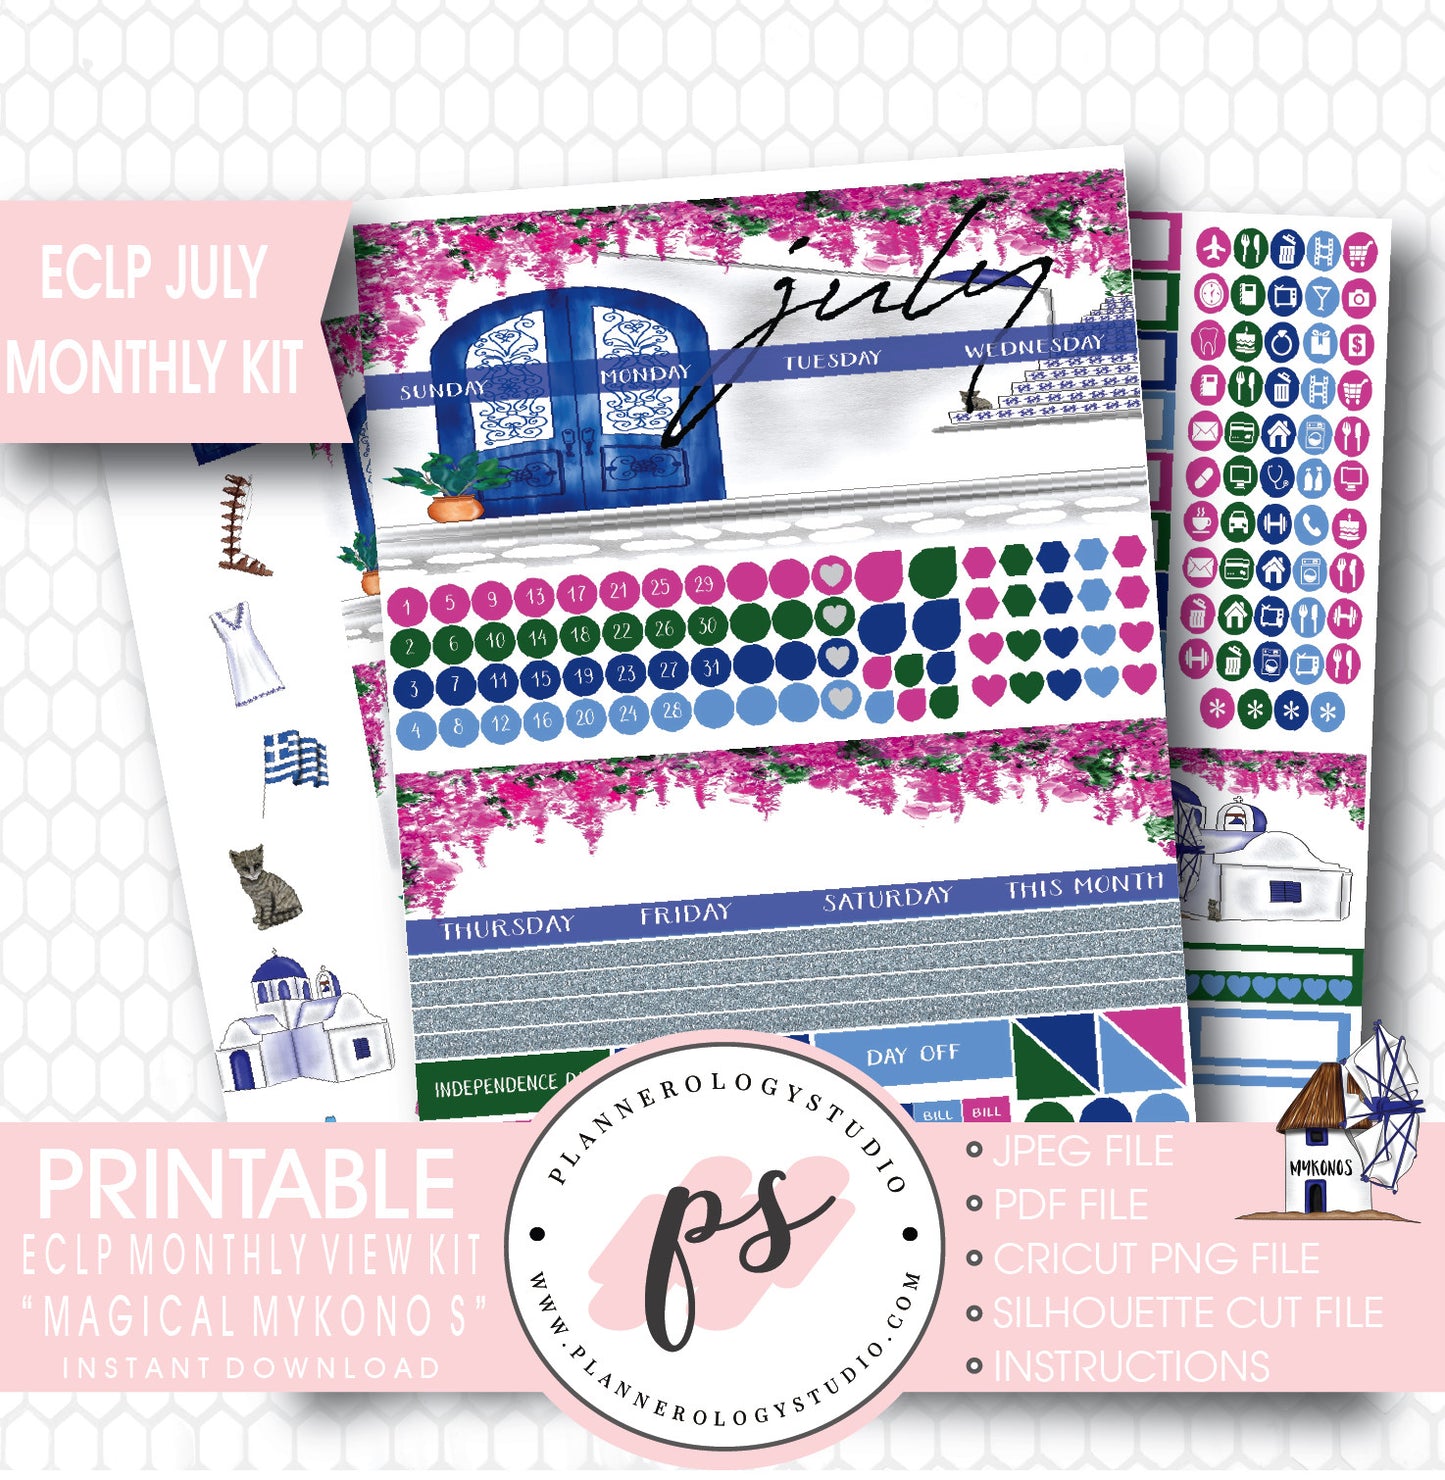 "Magical Mykonos" July 2017 Monthly View Kit Printable Planner Stickers (for use with ECLP) - Plannerologystudio